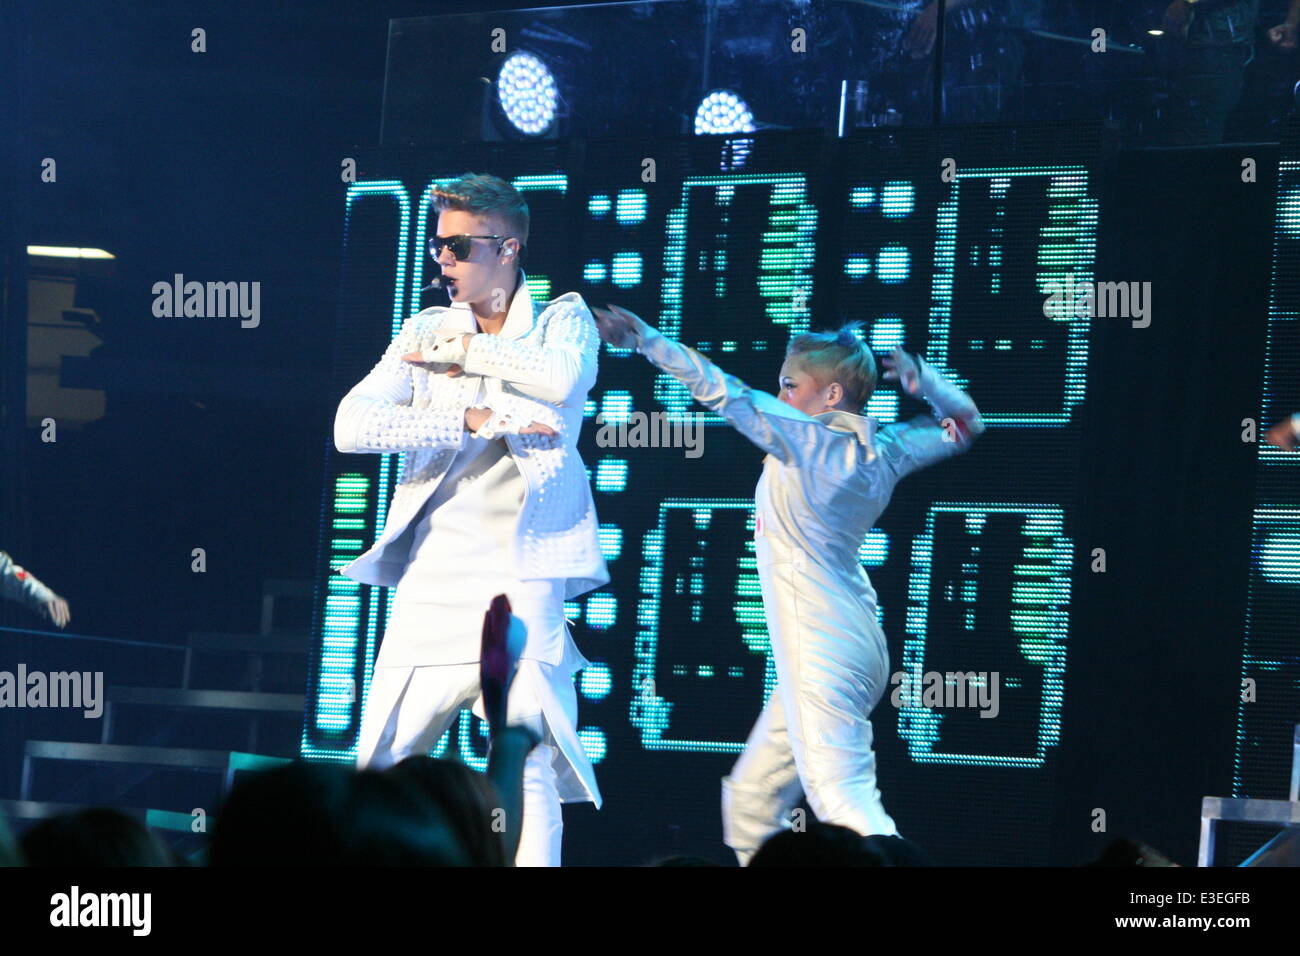 Justin Bieber performs live in concert as part of his 'Believe Tour' at the José Miguel Agrelot Coliseum  Featuring: Justin Bieber Where: Carolina, Puerto Rico When: 20 Oct 2013 Stock Photo